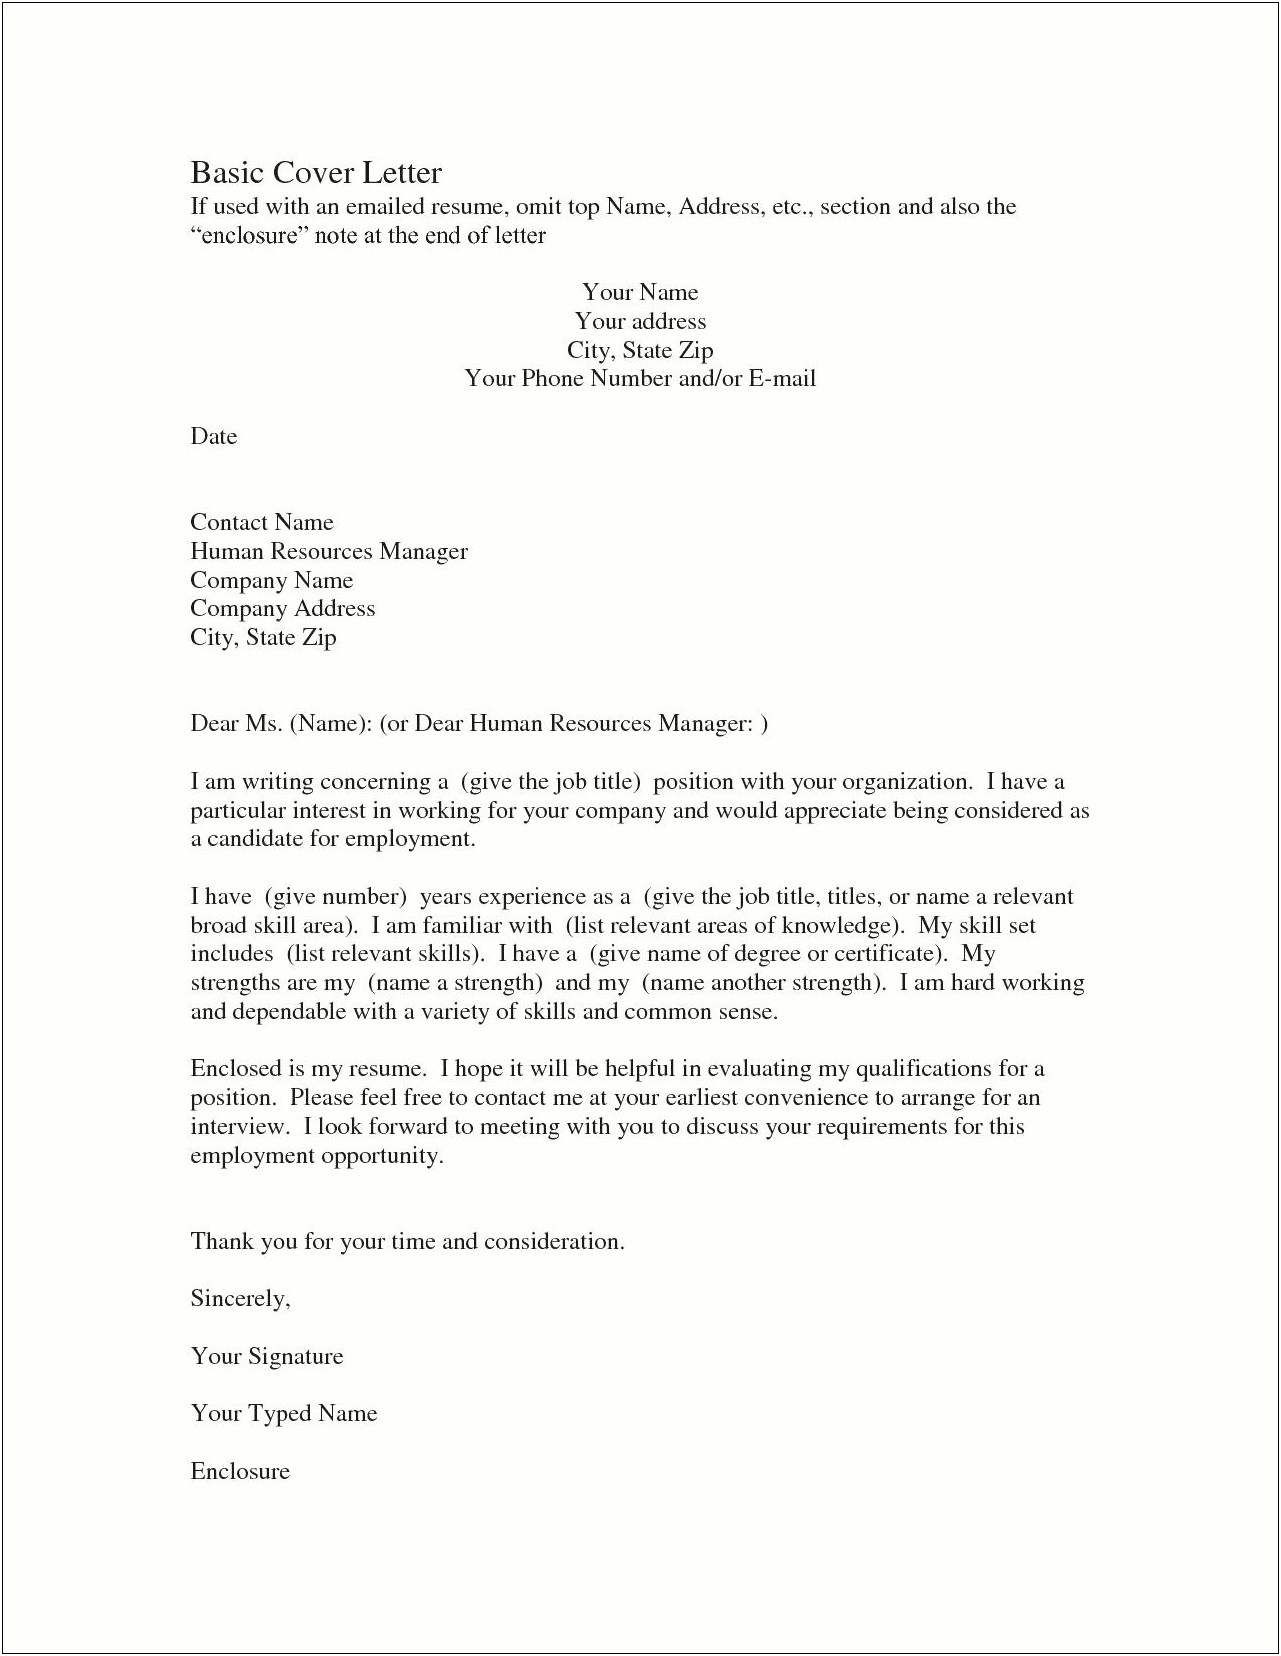 Employer Thank You Letter For Resume Submission